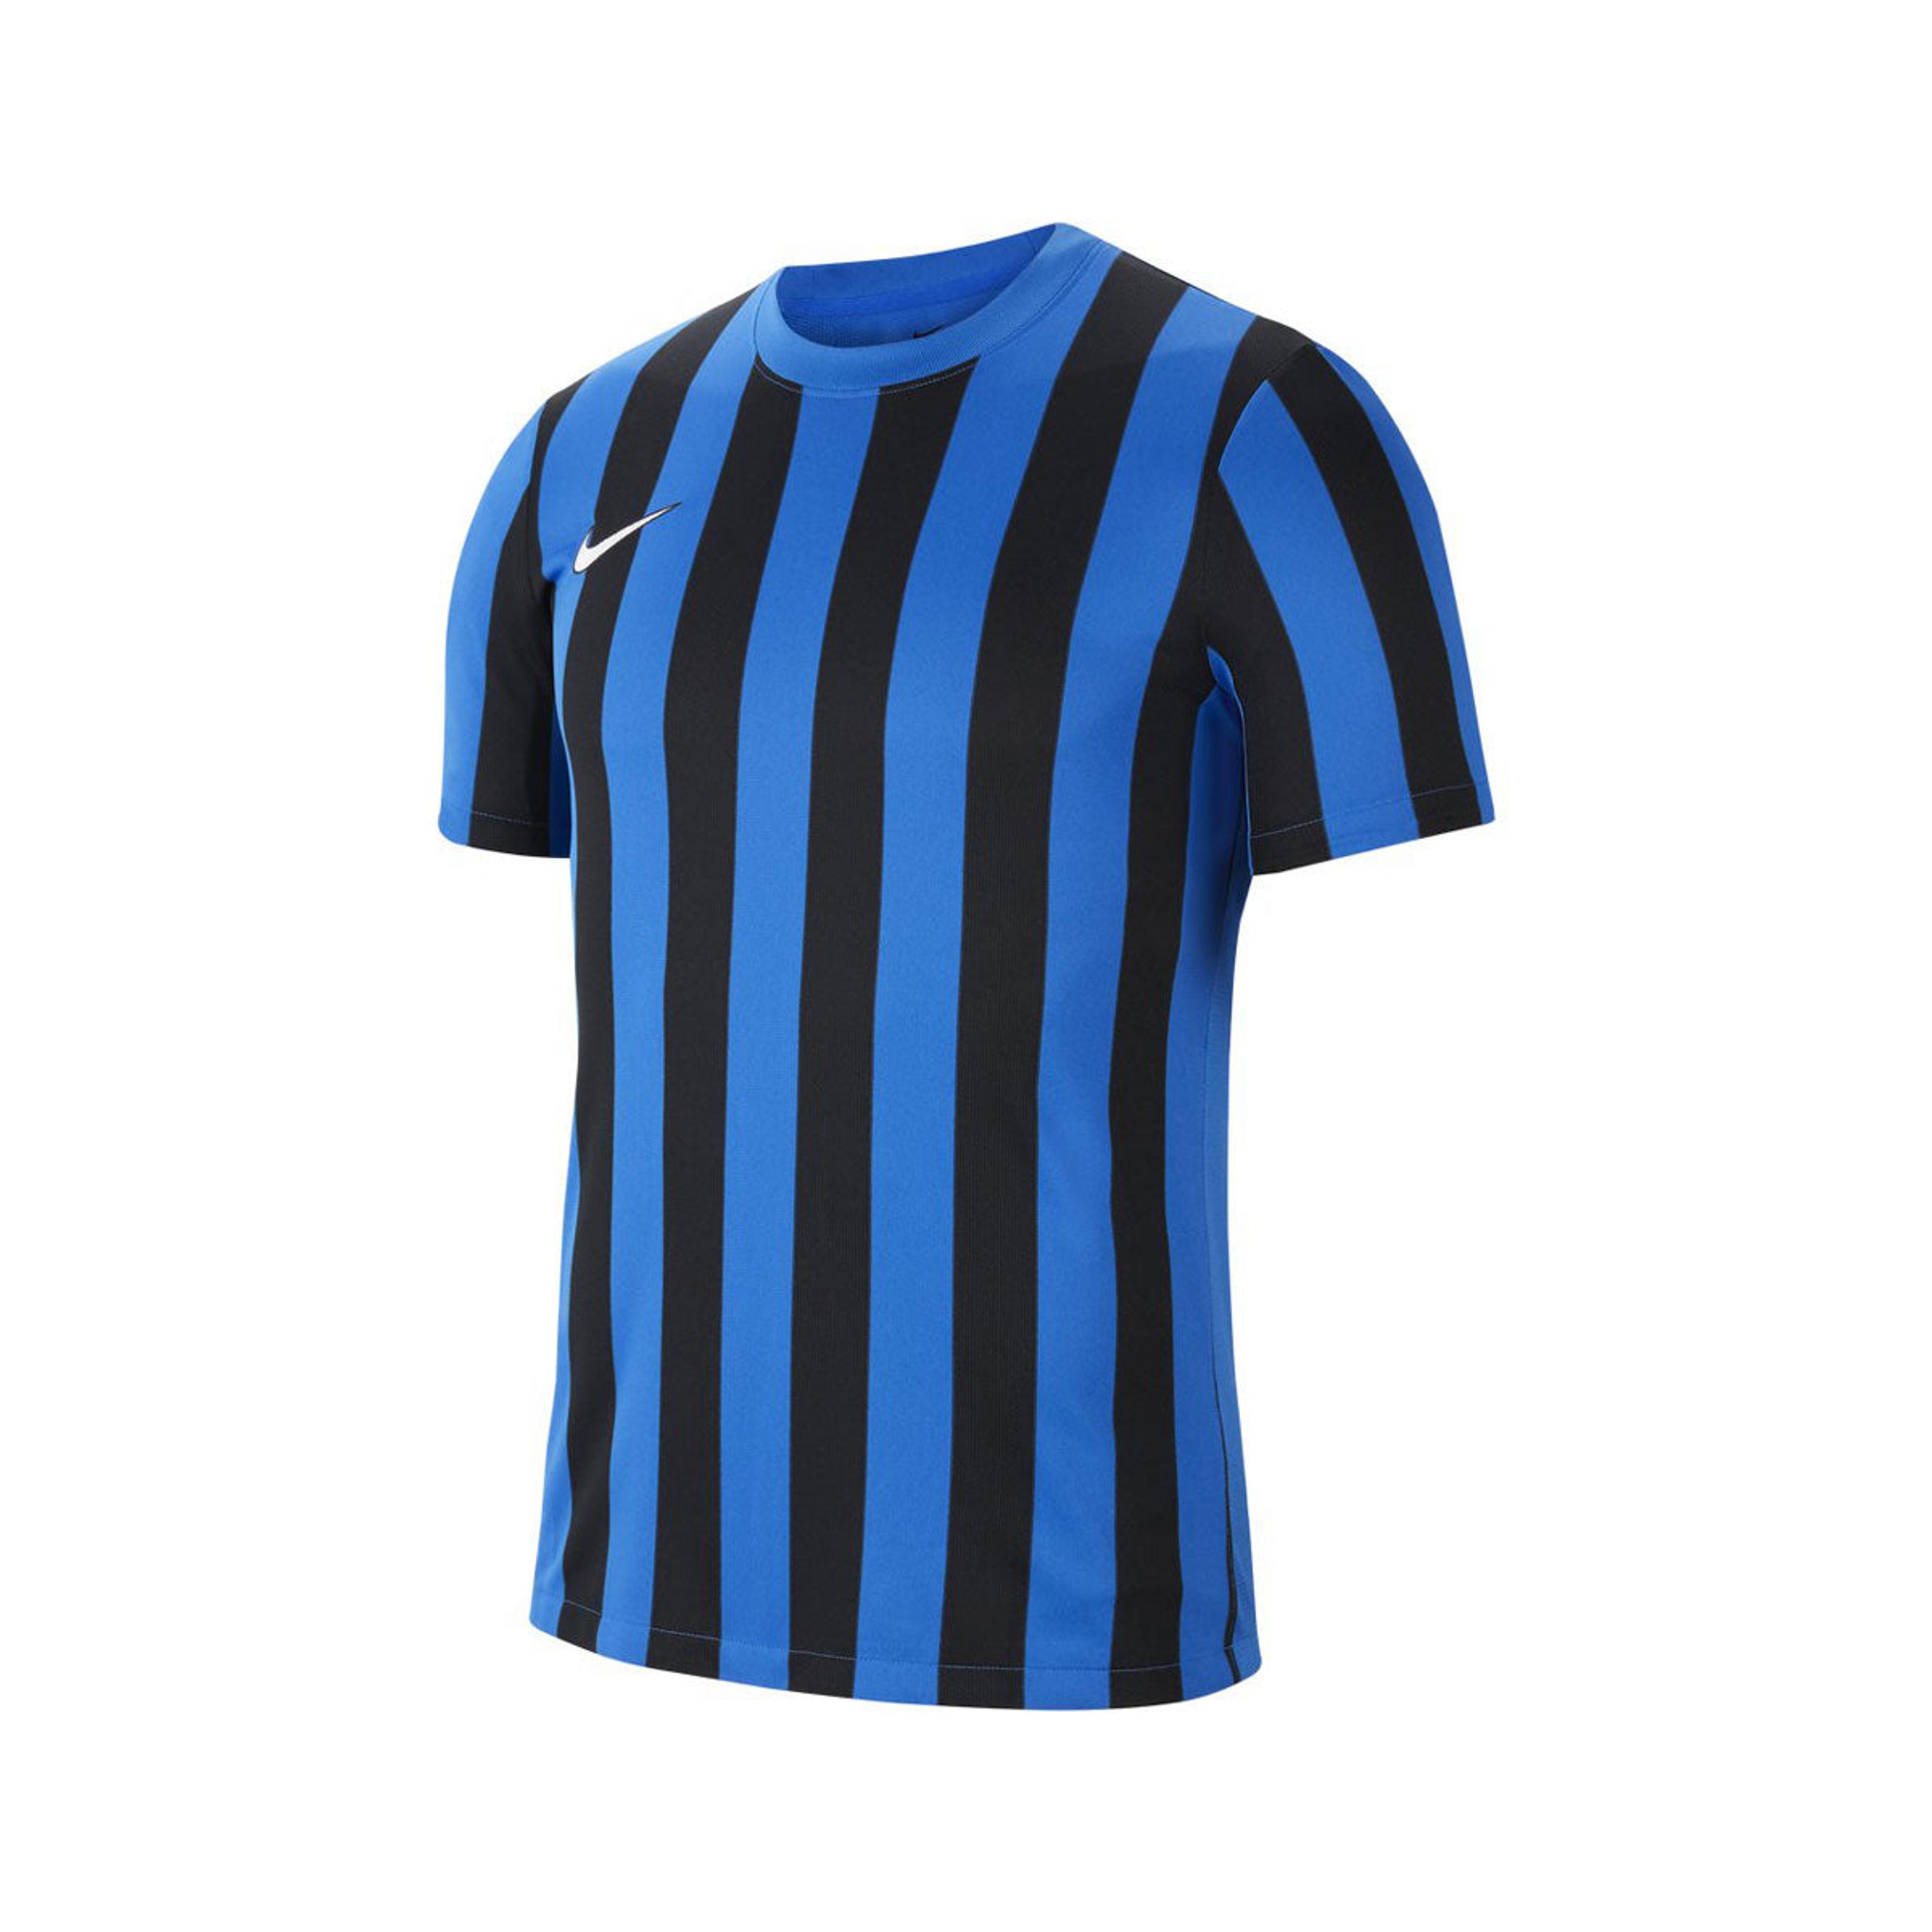 Nike Men's Striped Division 4 Jersey